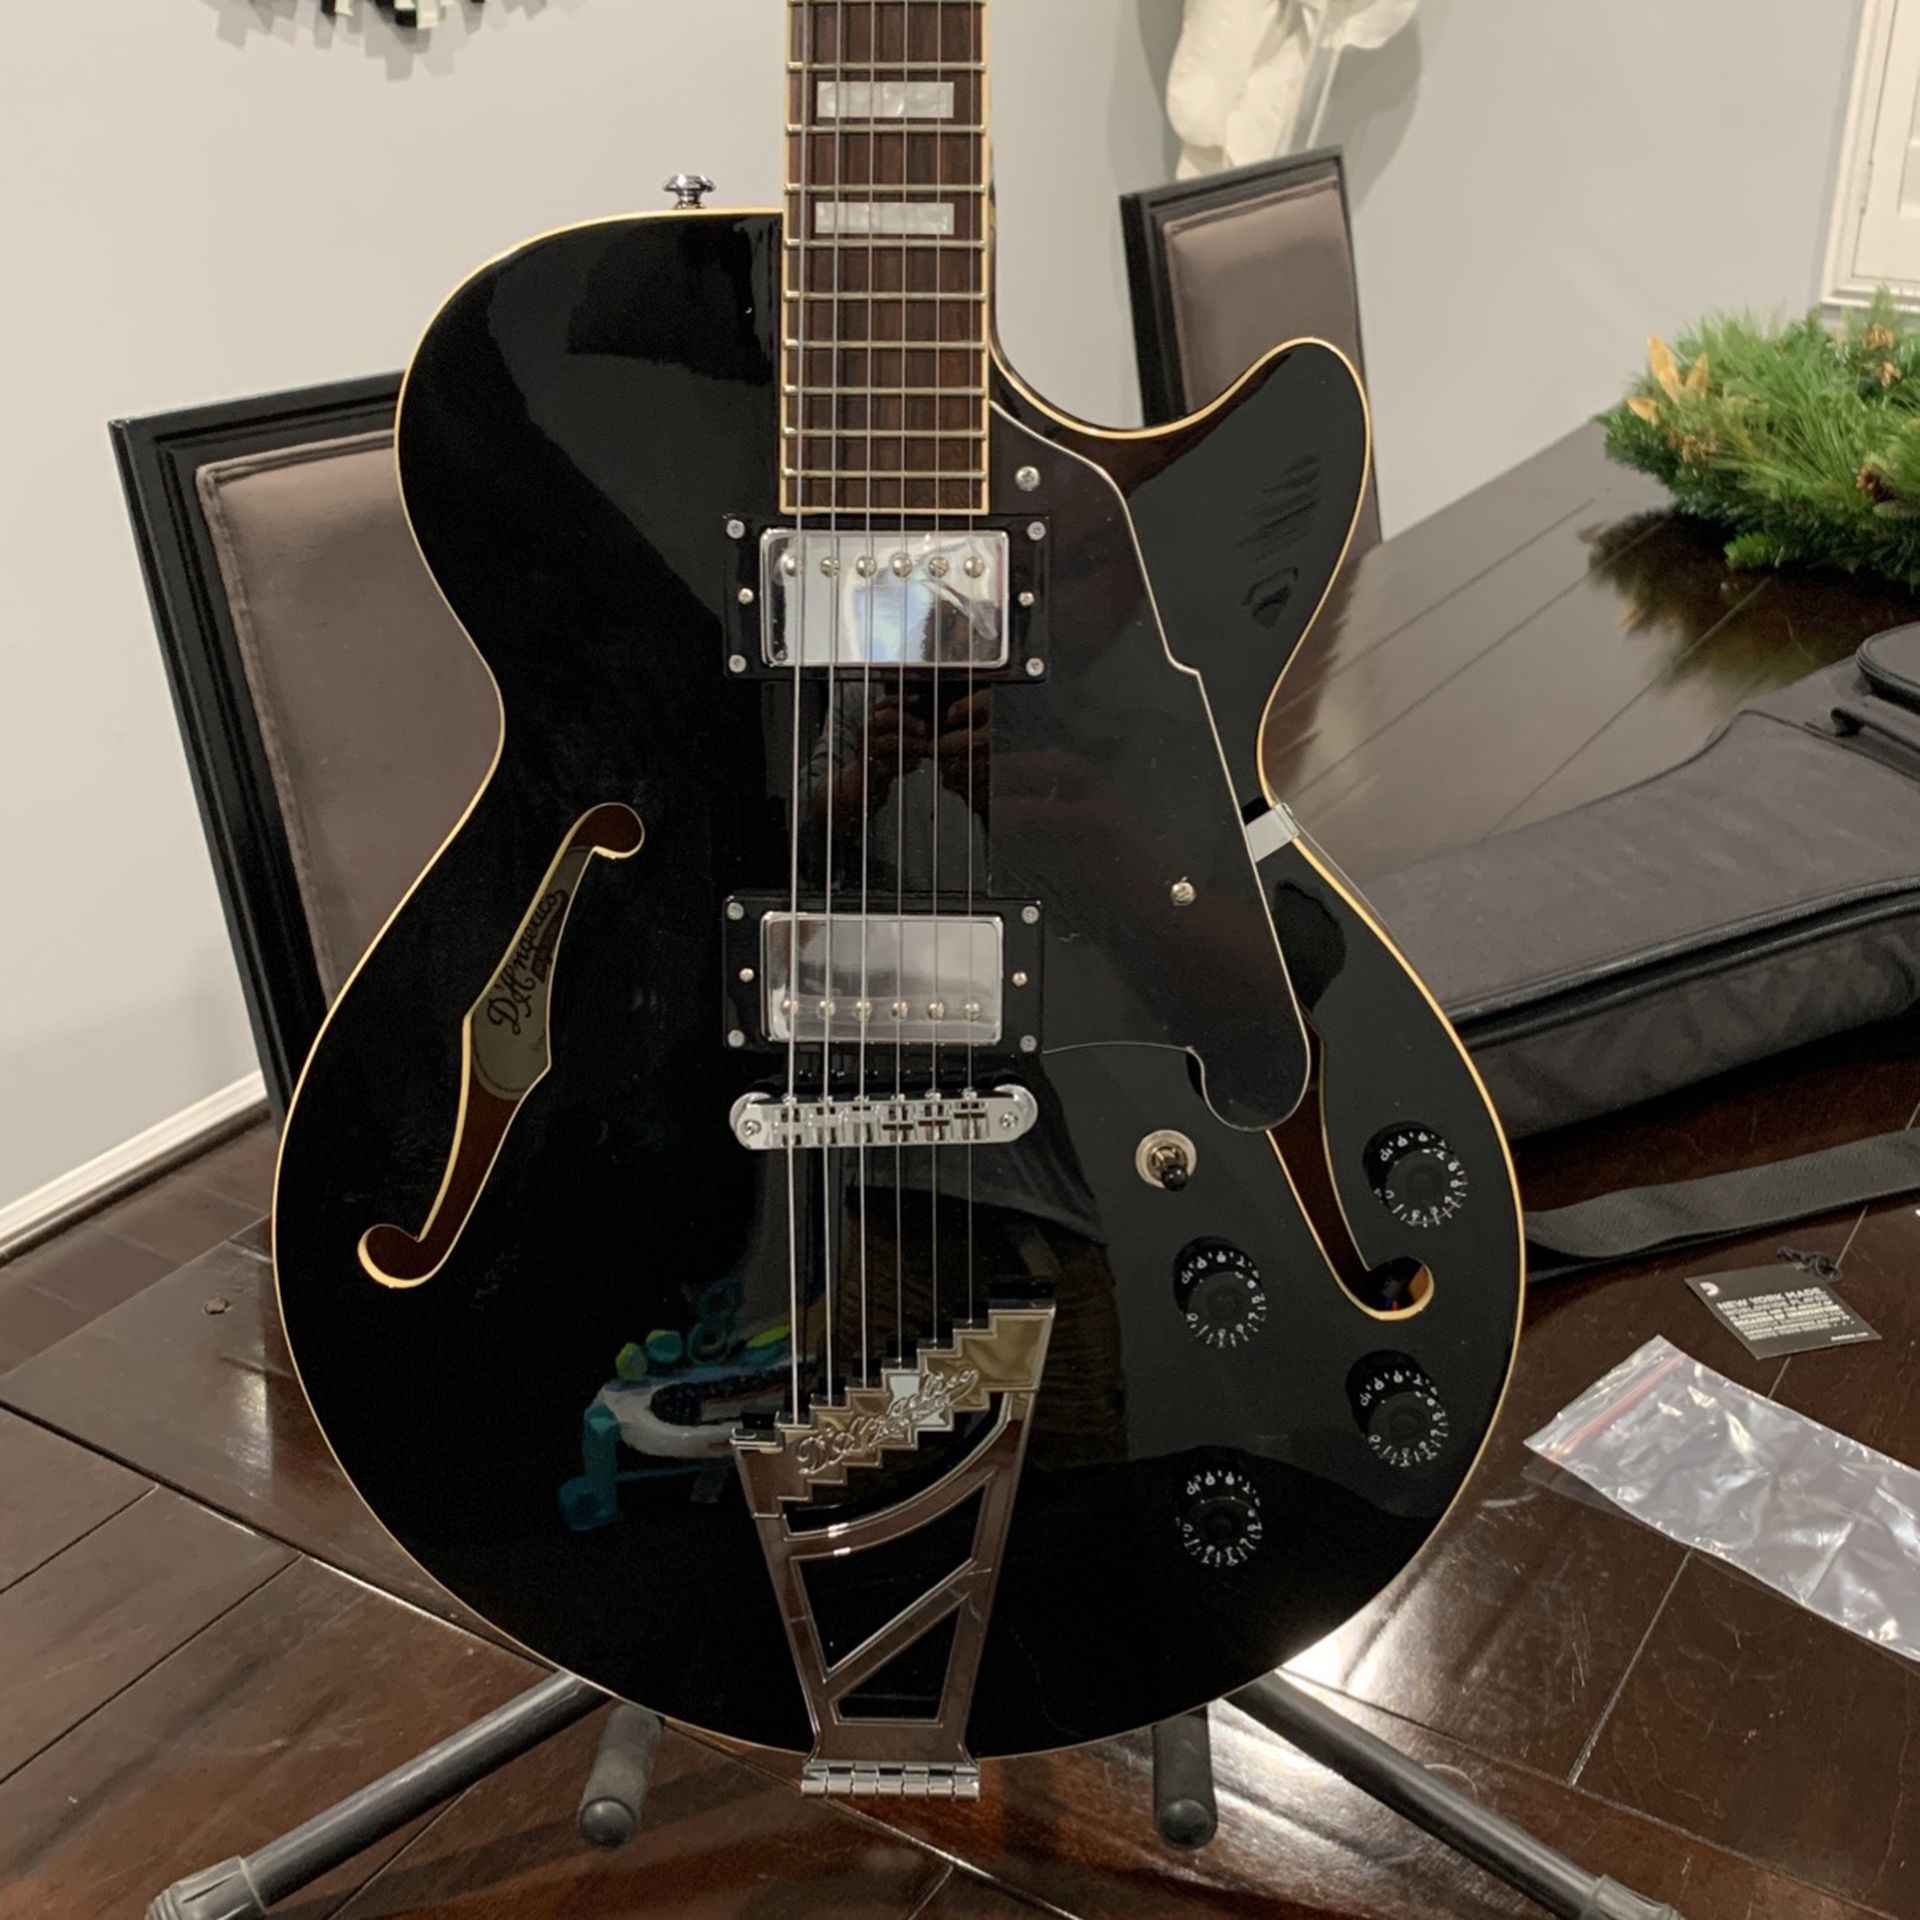 D’Angelico SS Premier Semi Hollow Body Like New